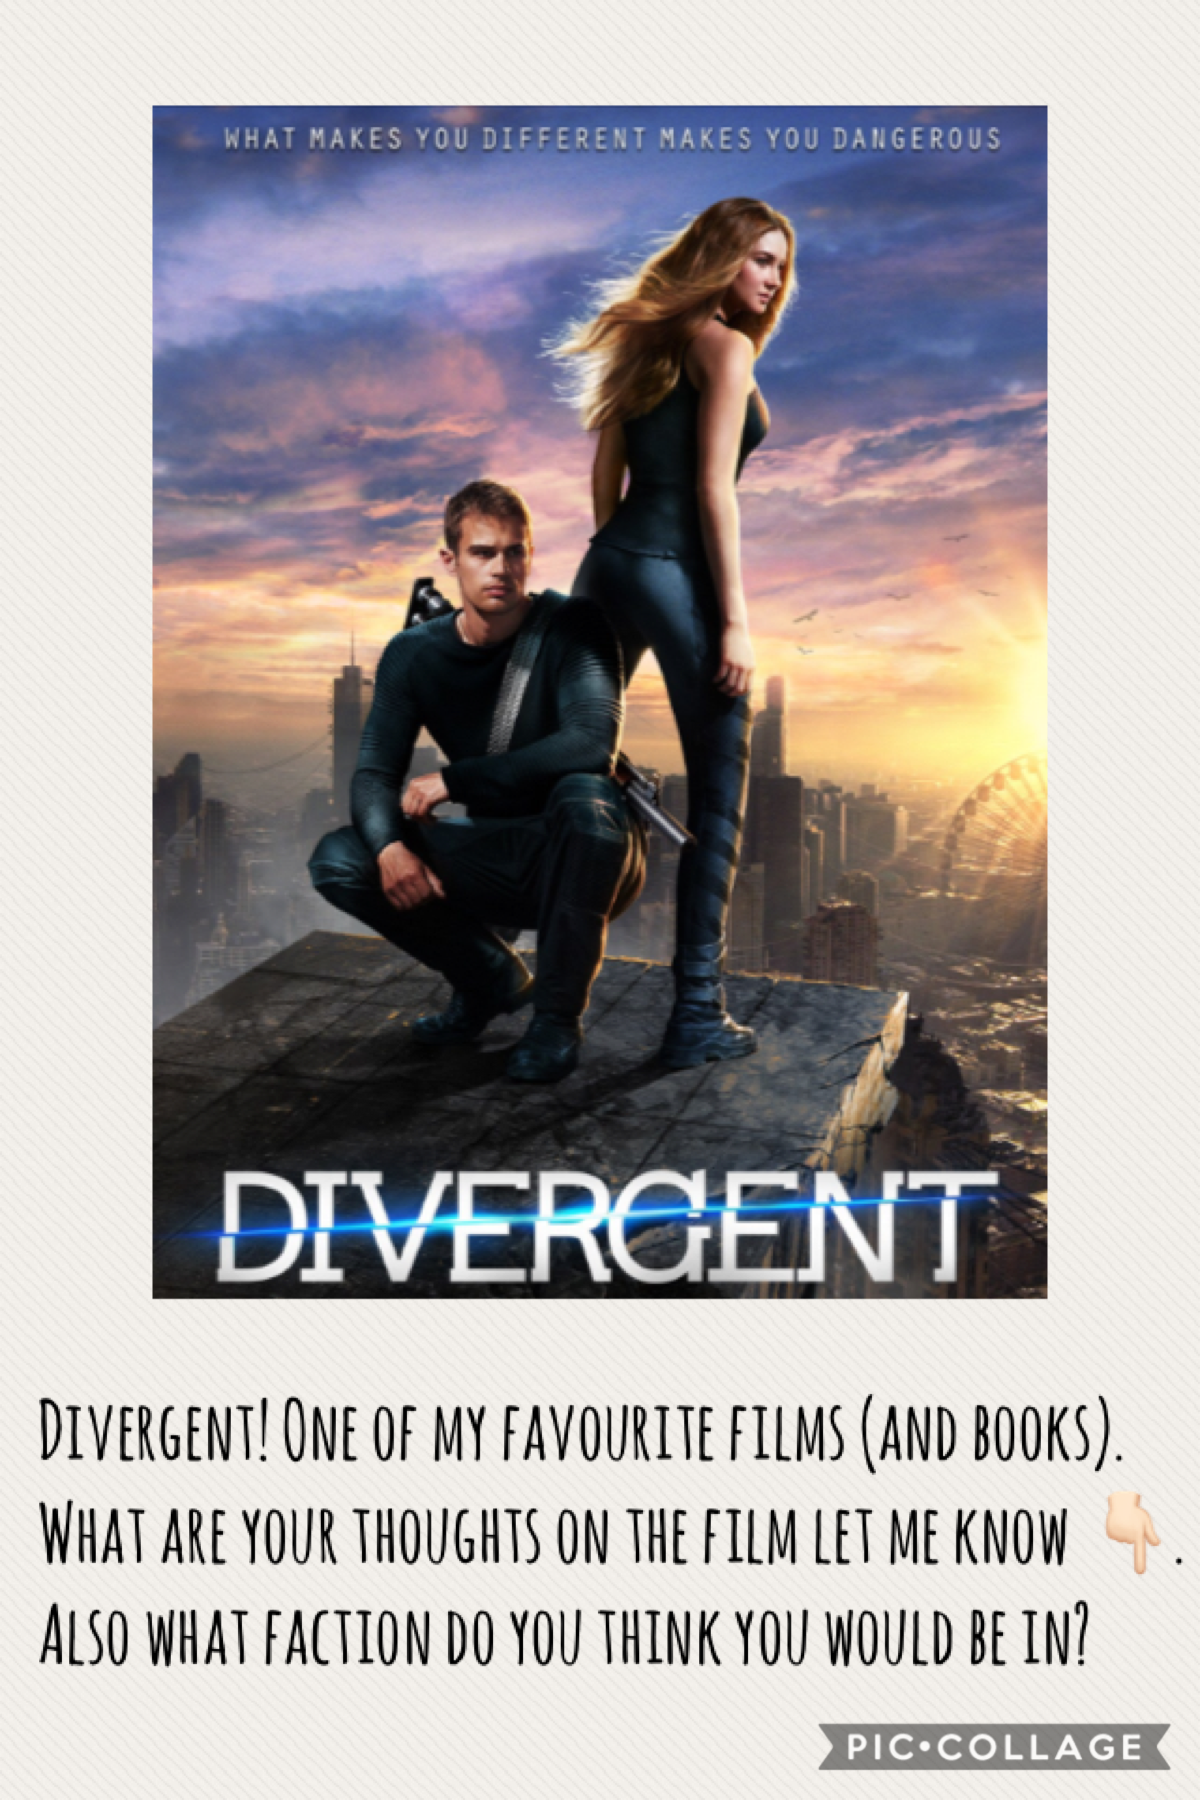 Divergent!!! I think I would be in Amity how about you?